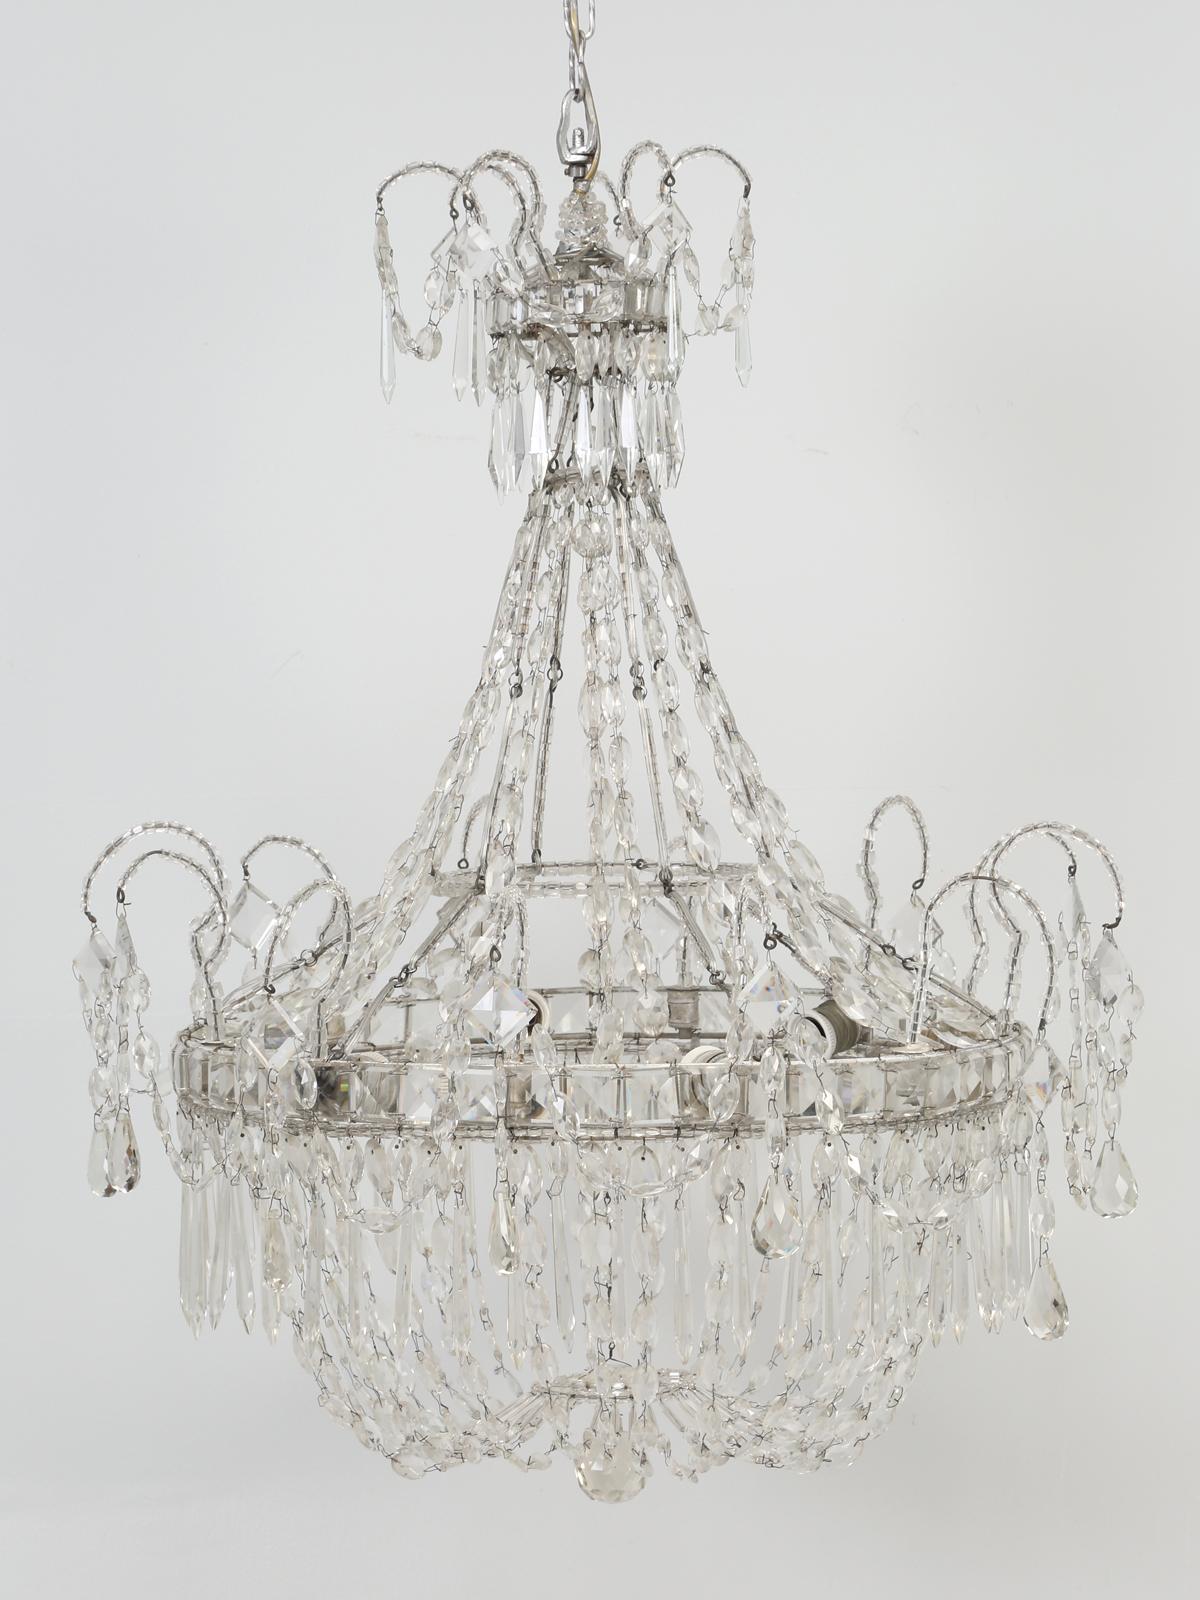 Antique Empire Italian chandelier. This is one of the few times, that we have ever received an item, accompanied with a Letter of Authenticity. The letter states; Empire beaded crystal six-light chandelier, circa 1860. Goes on to mention the